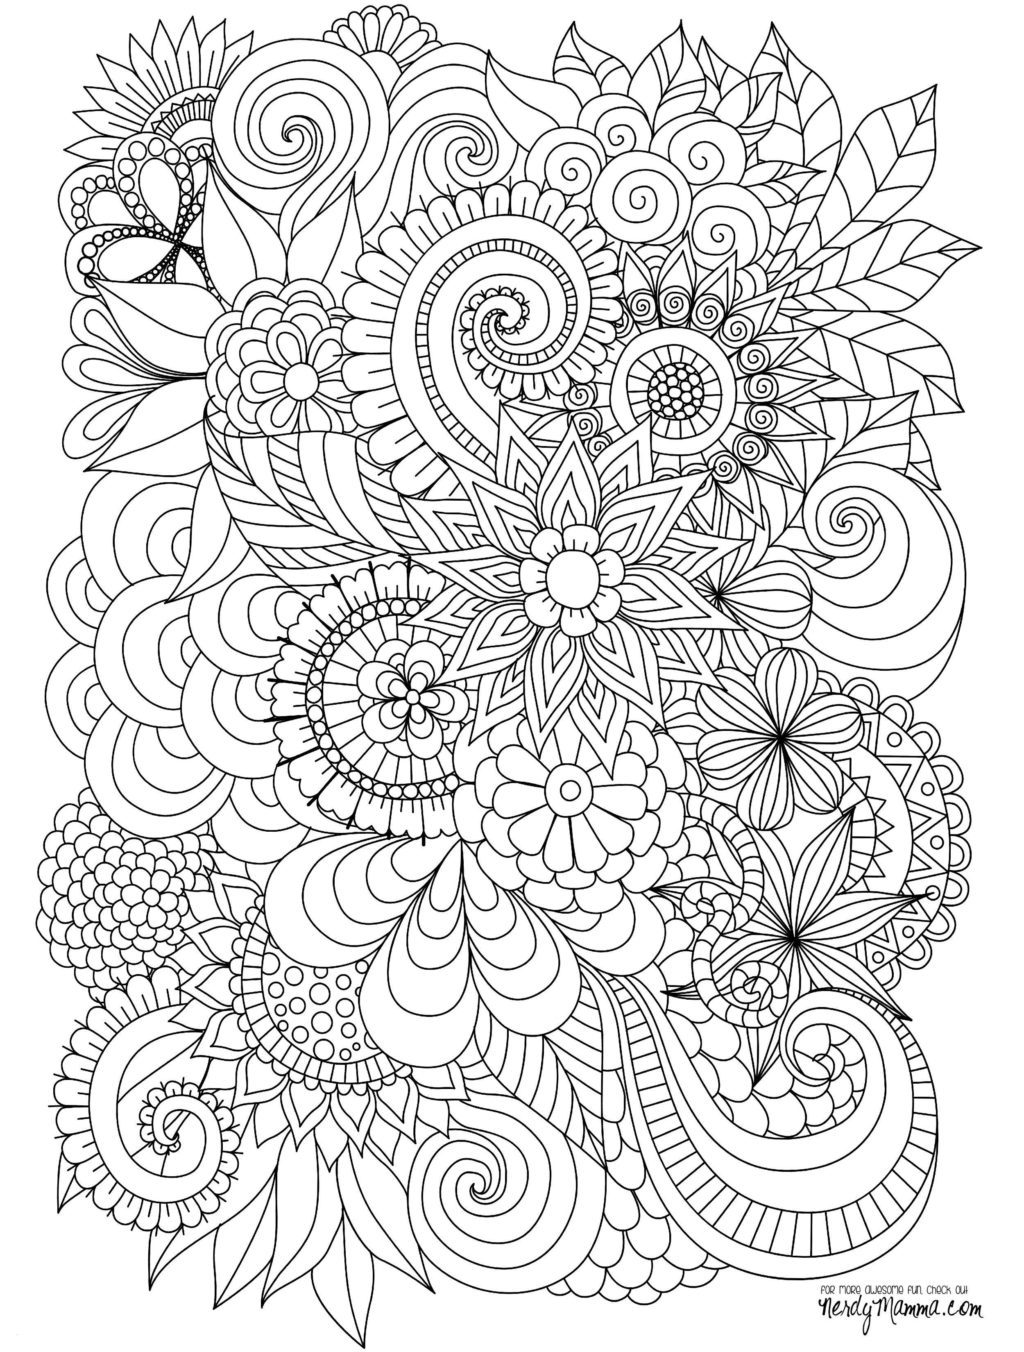 Coffee Table : Advanced Mandala Coloring Pages Inappropriate Books ...